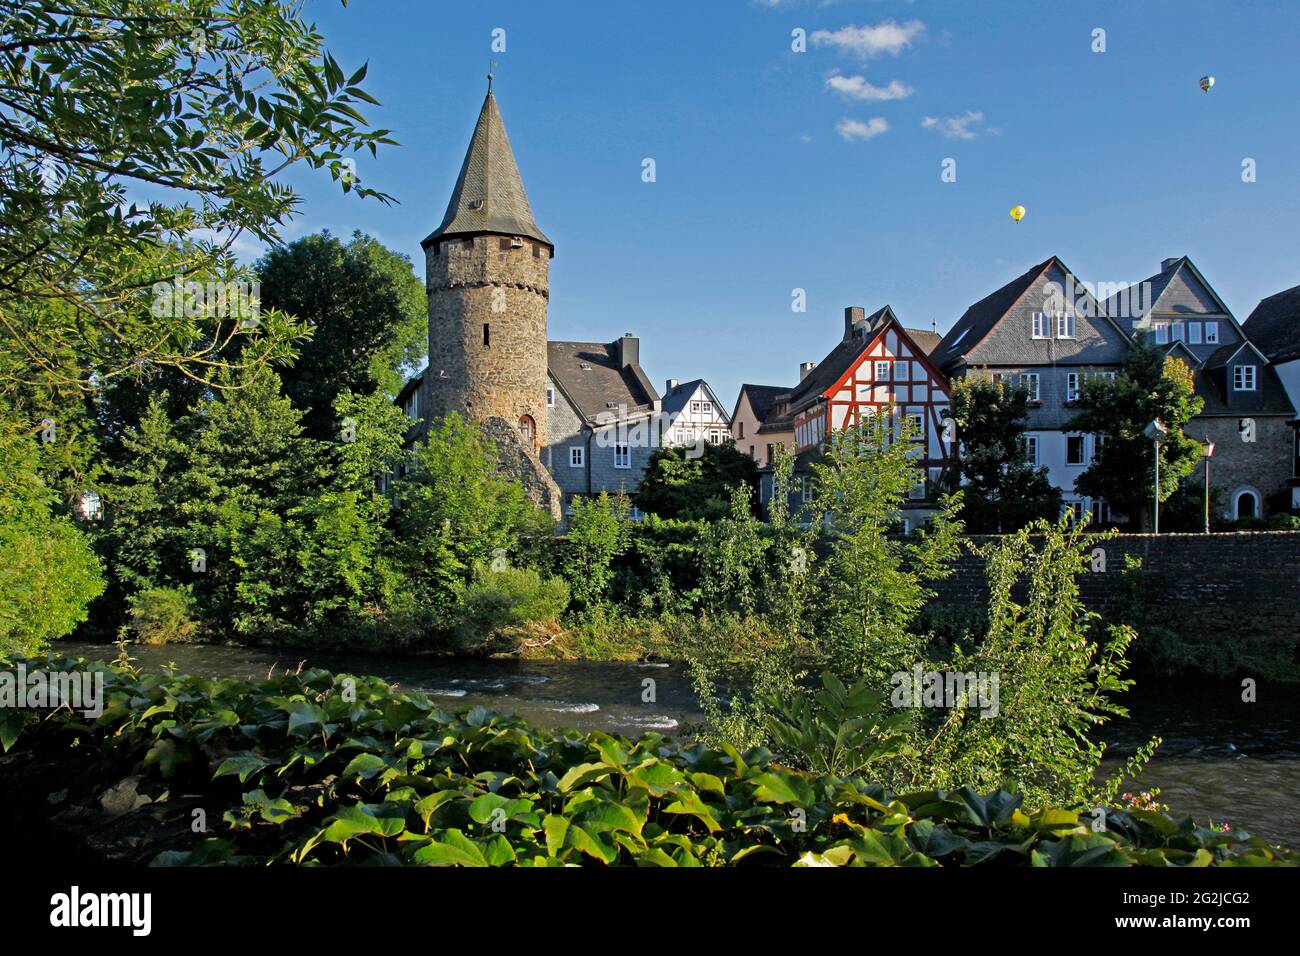 Dill Tower on the Dill, built 13./14. Century, balloons, balloon ride, Herborn, Hesse, Germany Stock Photo